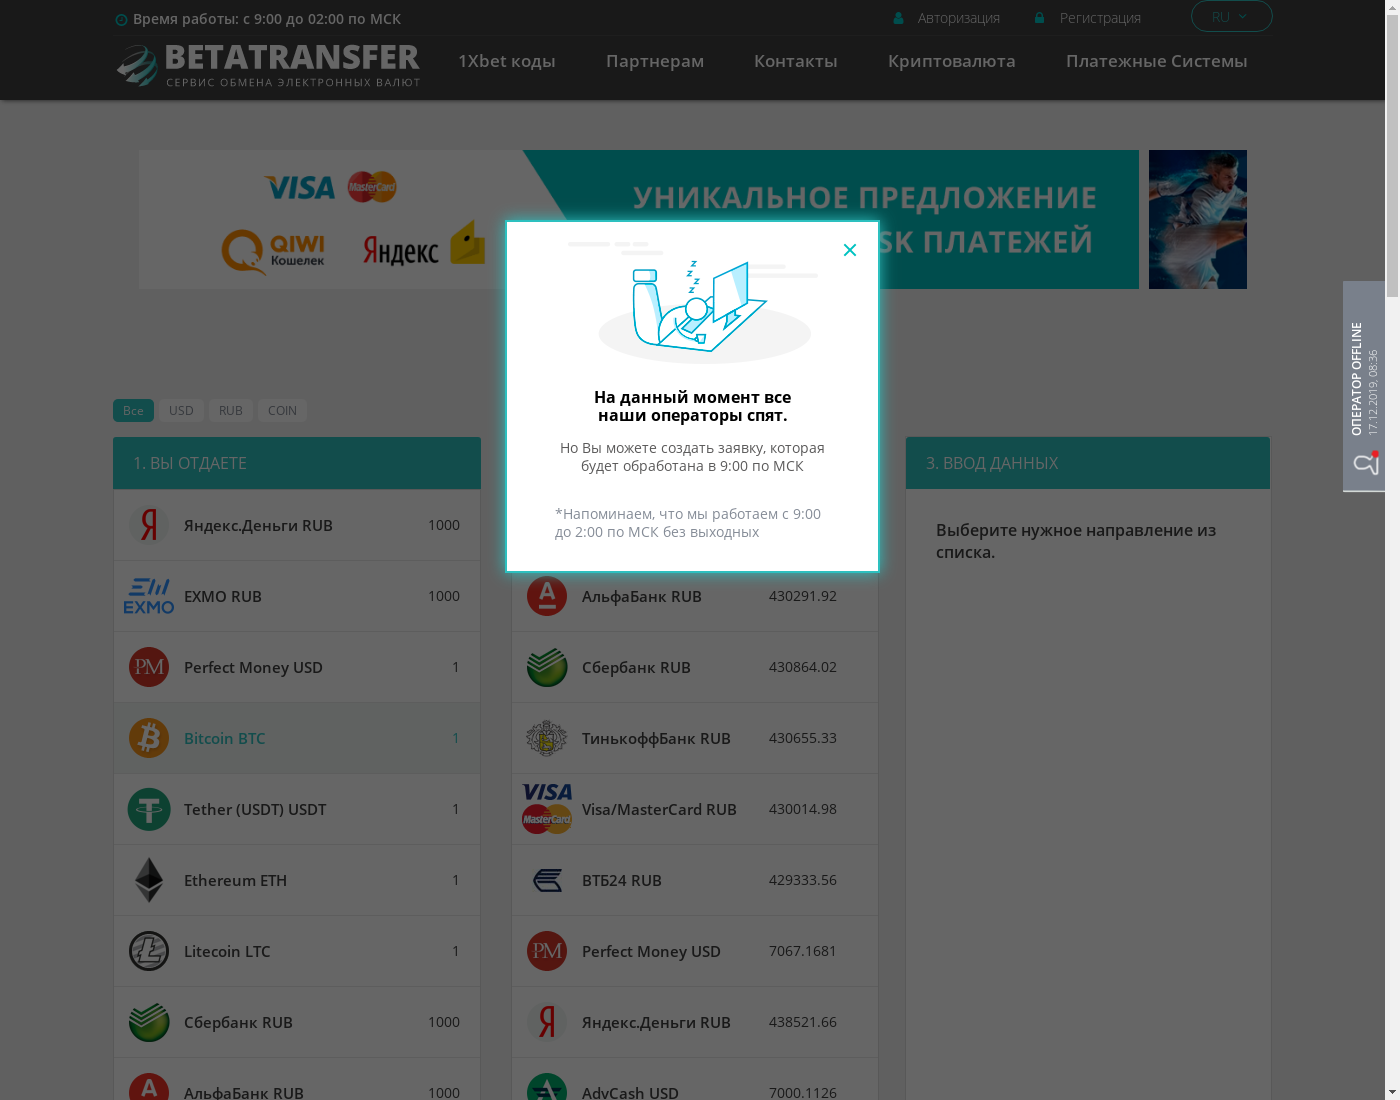 betatransfer user interface: the home page in English